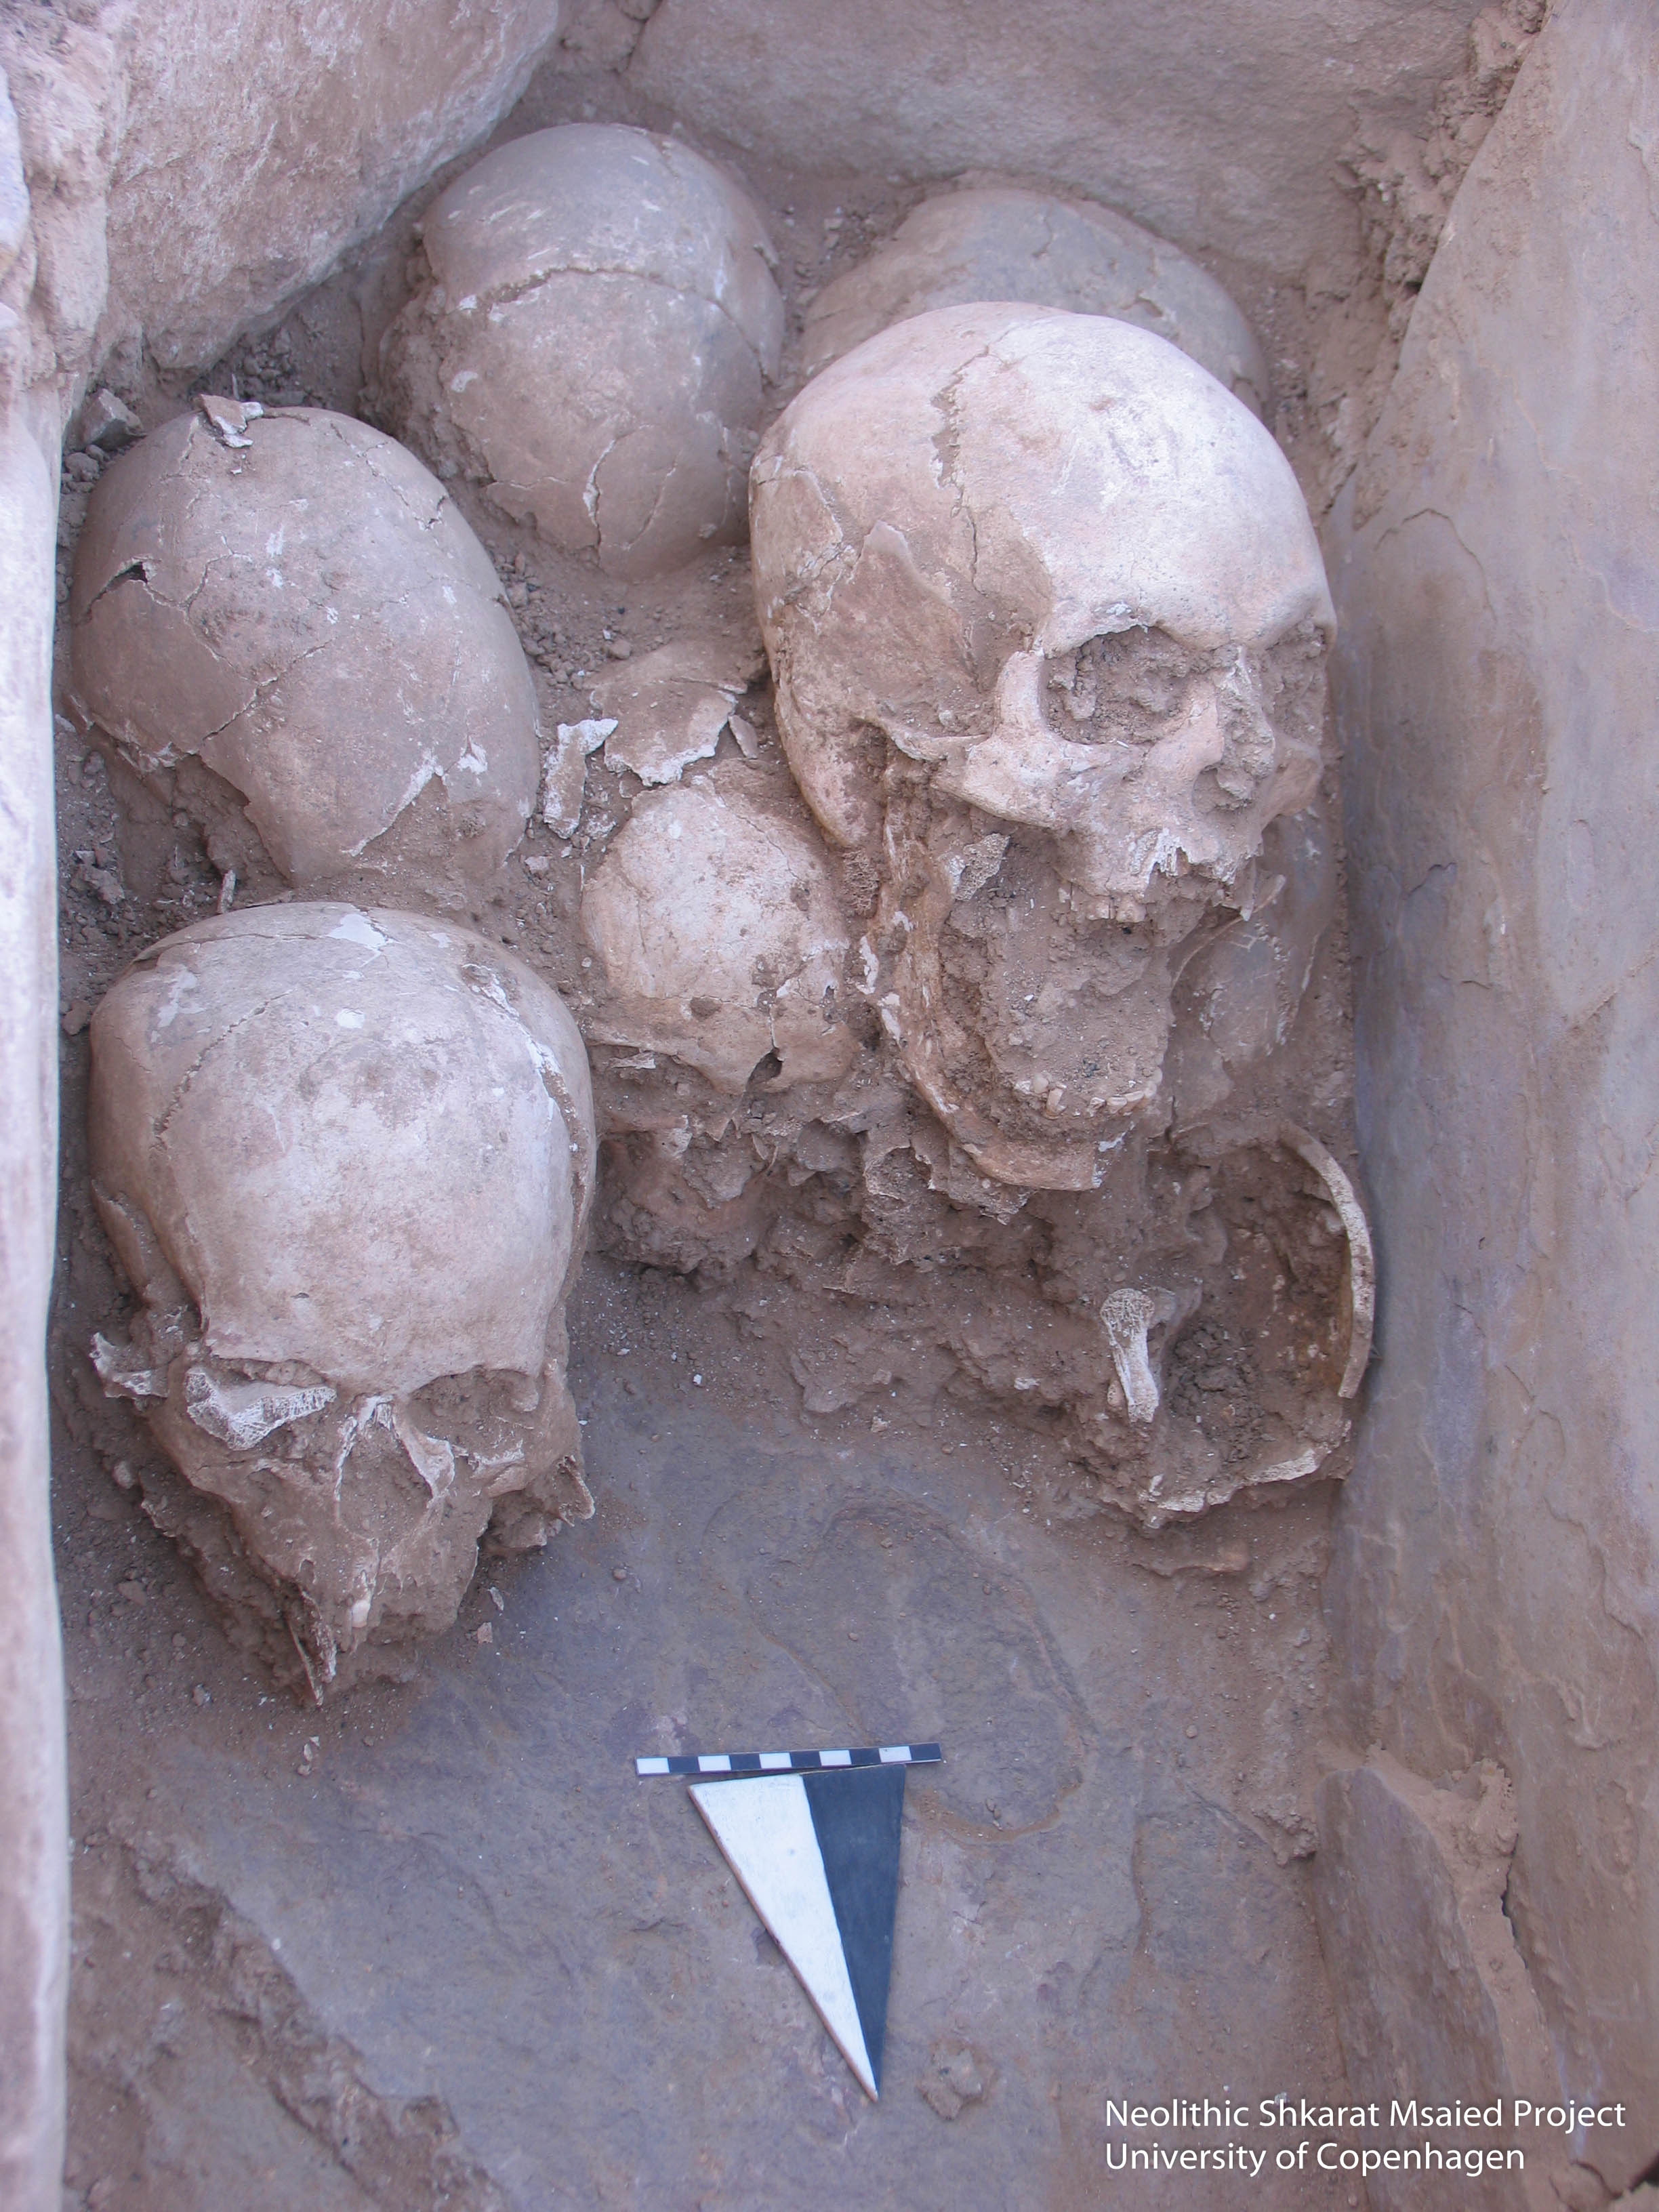 Danes discover 9,000-year-old skeletons with a strange history